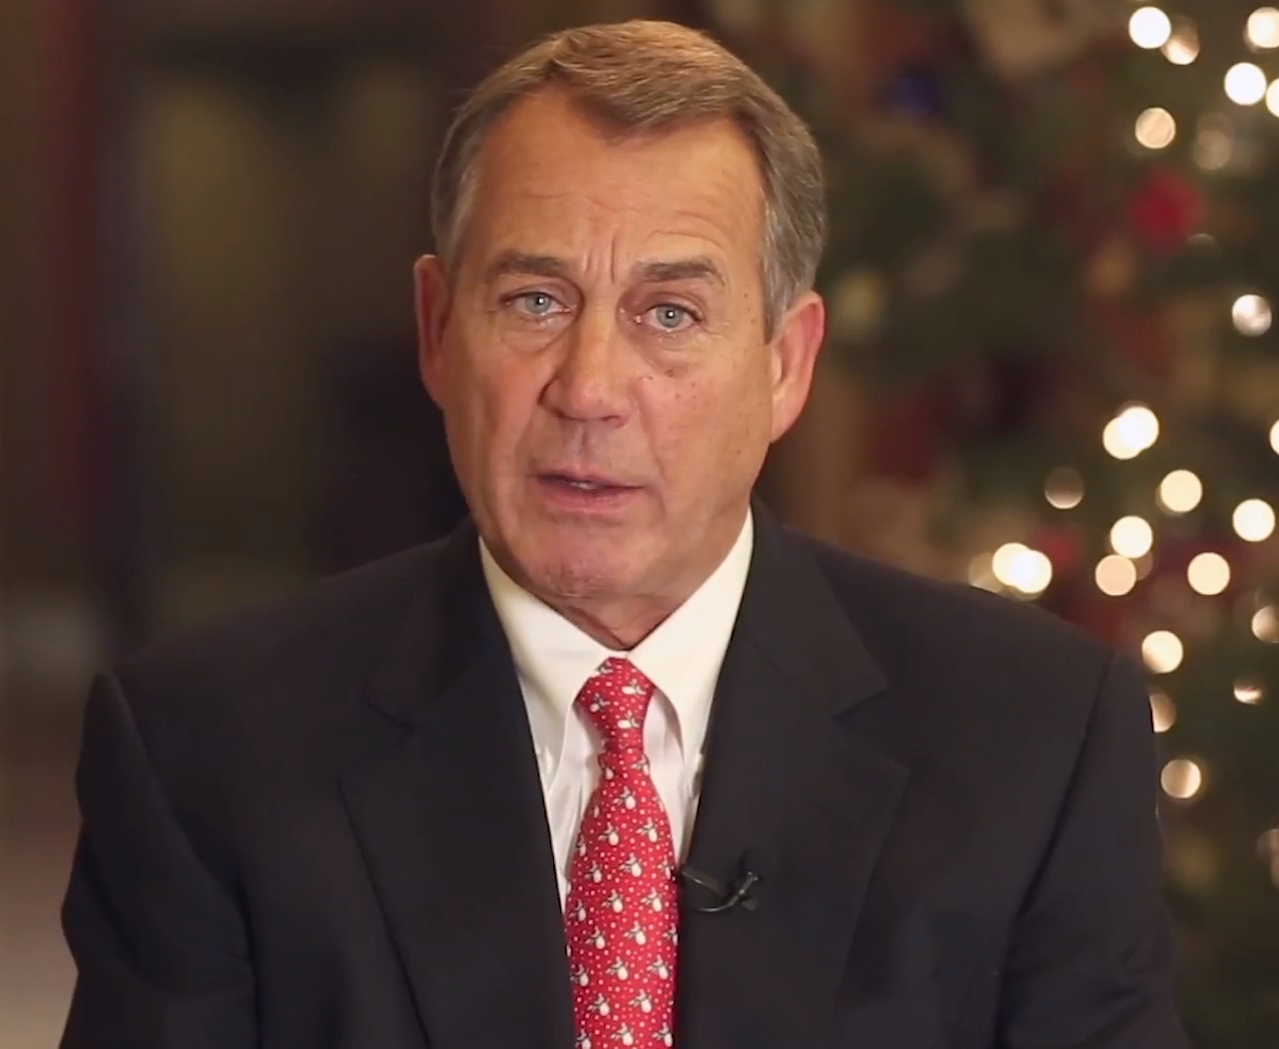 Boehner To Obama Deal Honestly On Fiscal Cliff Cbs News 8990